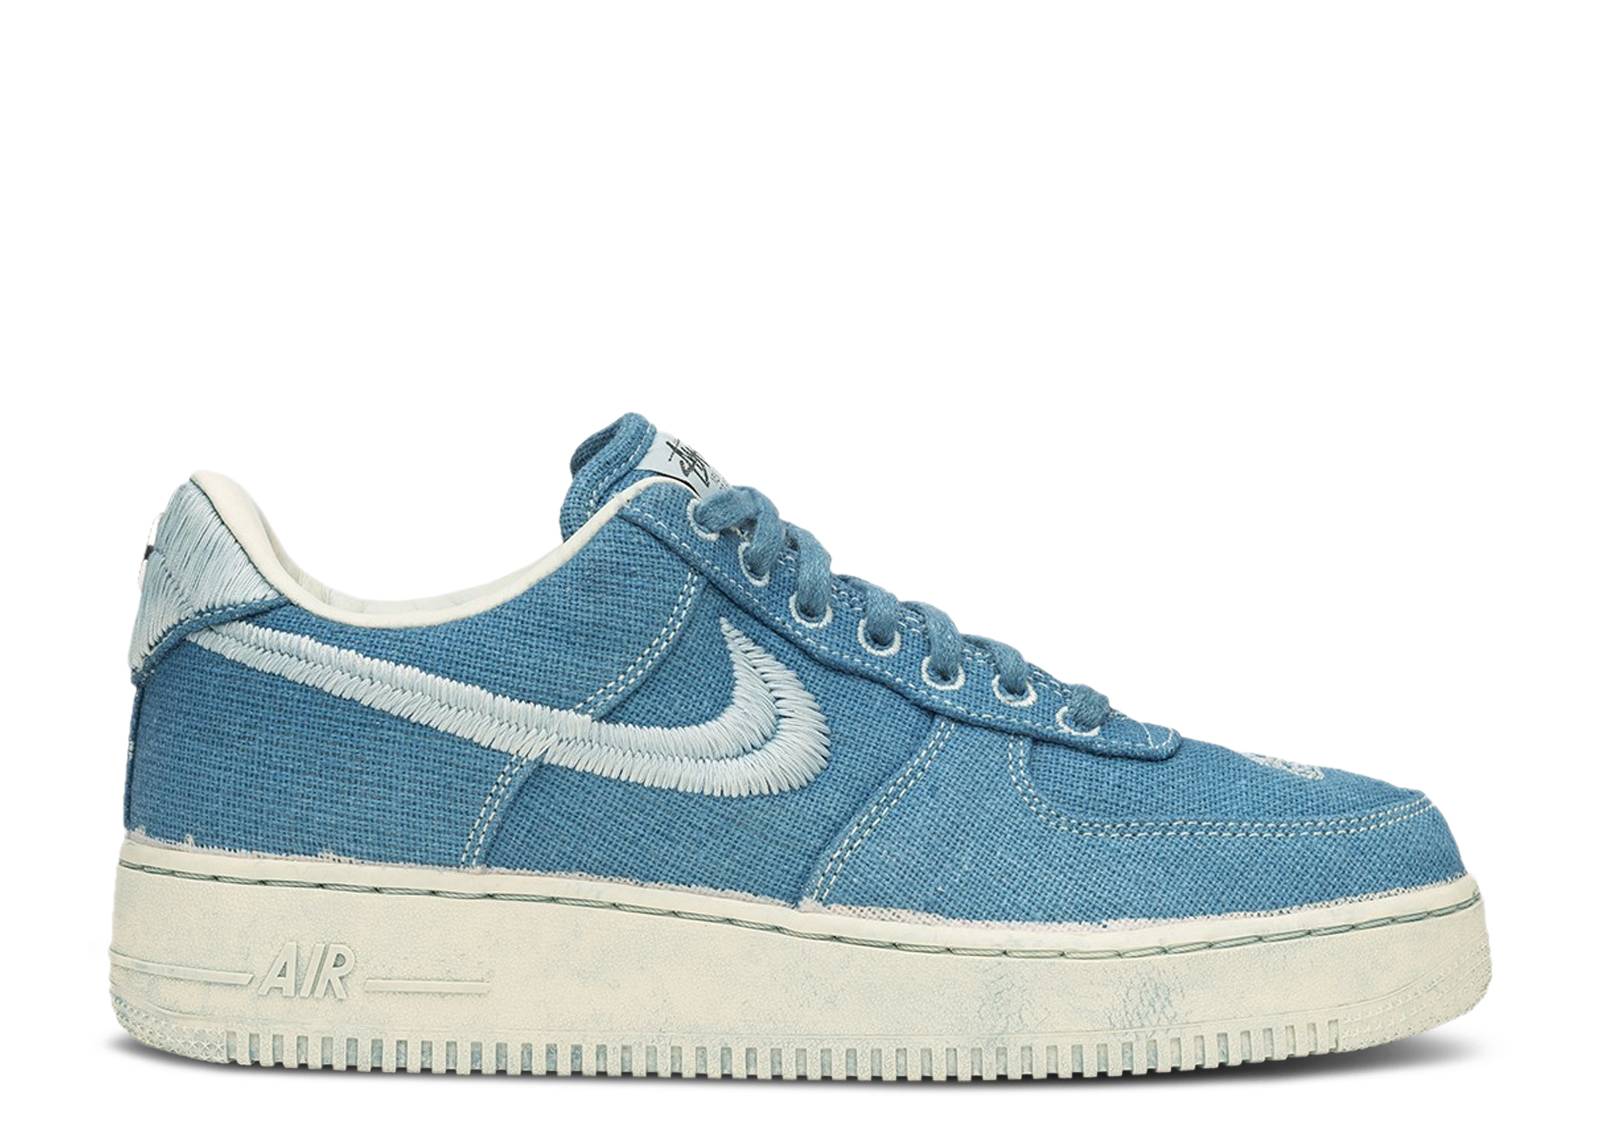 Stussy x Lookout & Wonderland x Air Force 1 Low 'Hand Dyed - Blue'